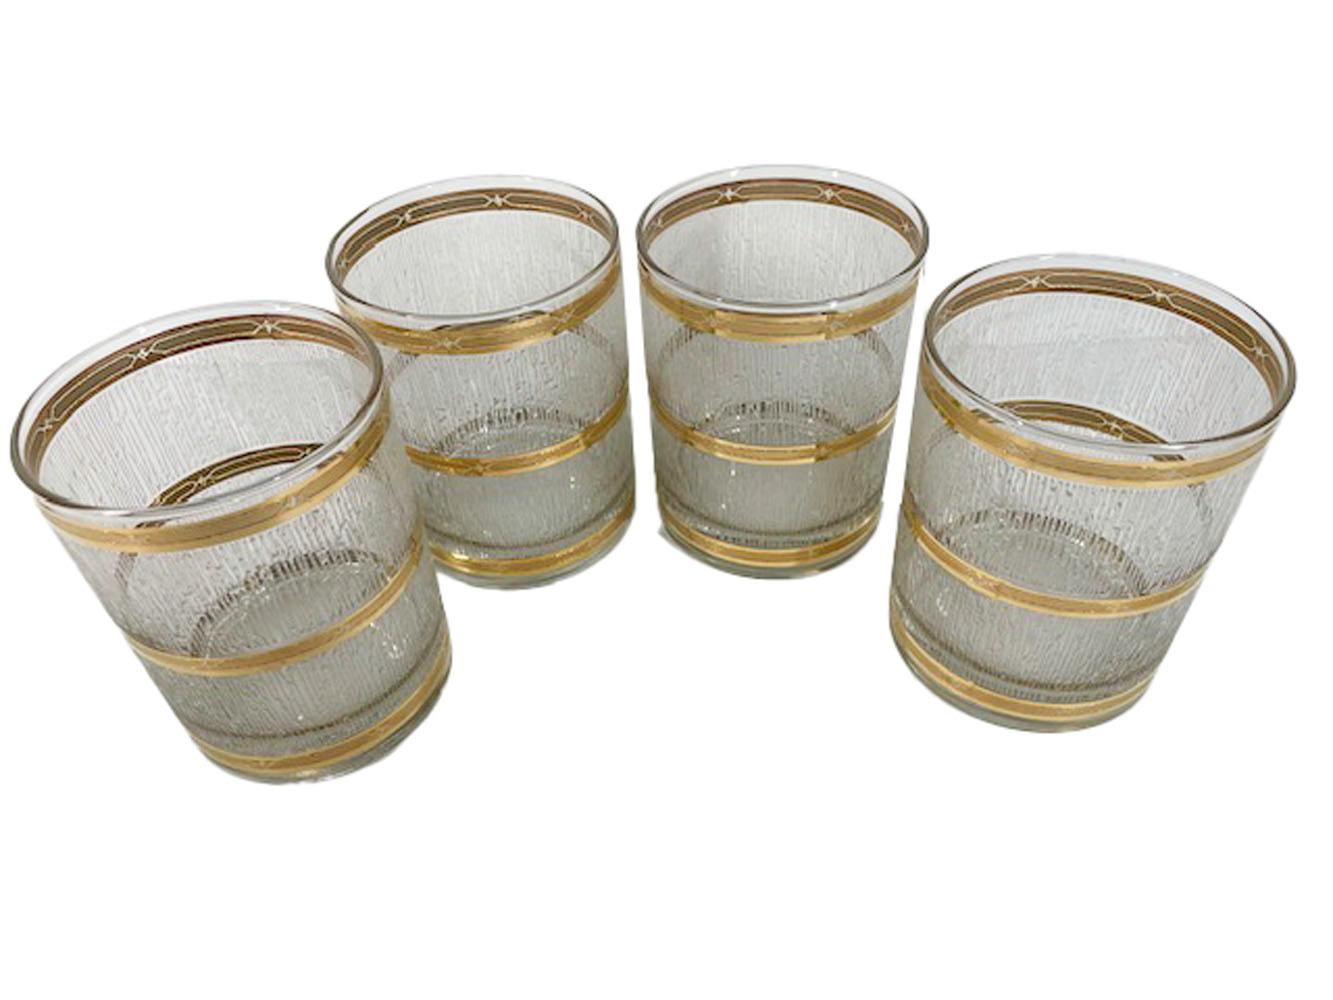 Mid-Century Modern Vintage Culver Glassware Rocks Glasses in the Icicle Pattern with 22k Gold Bands